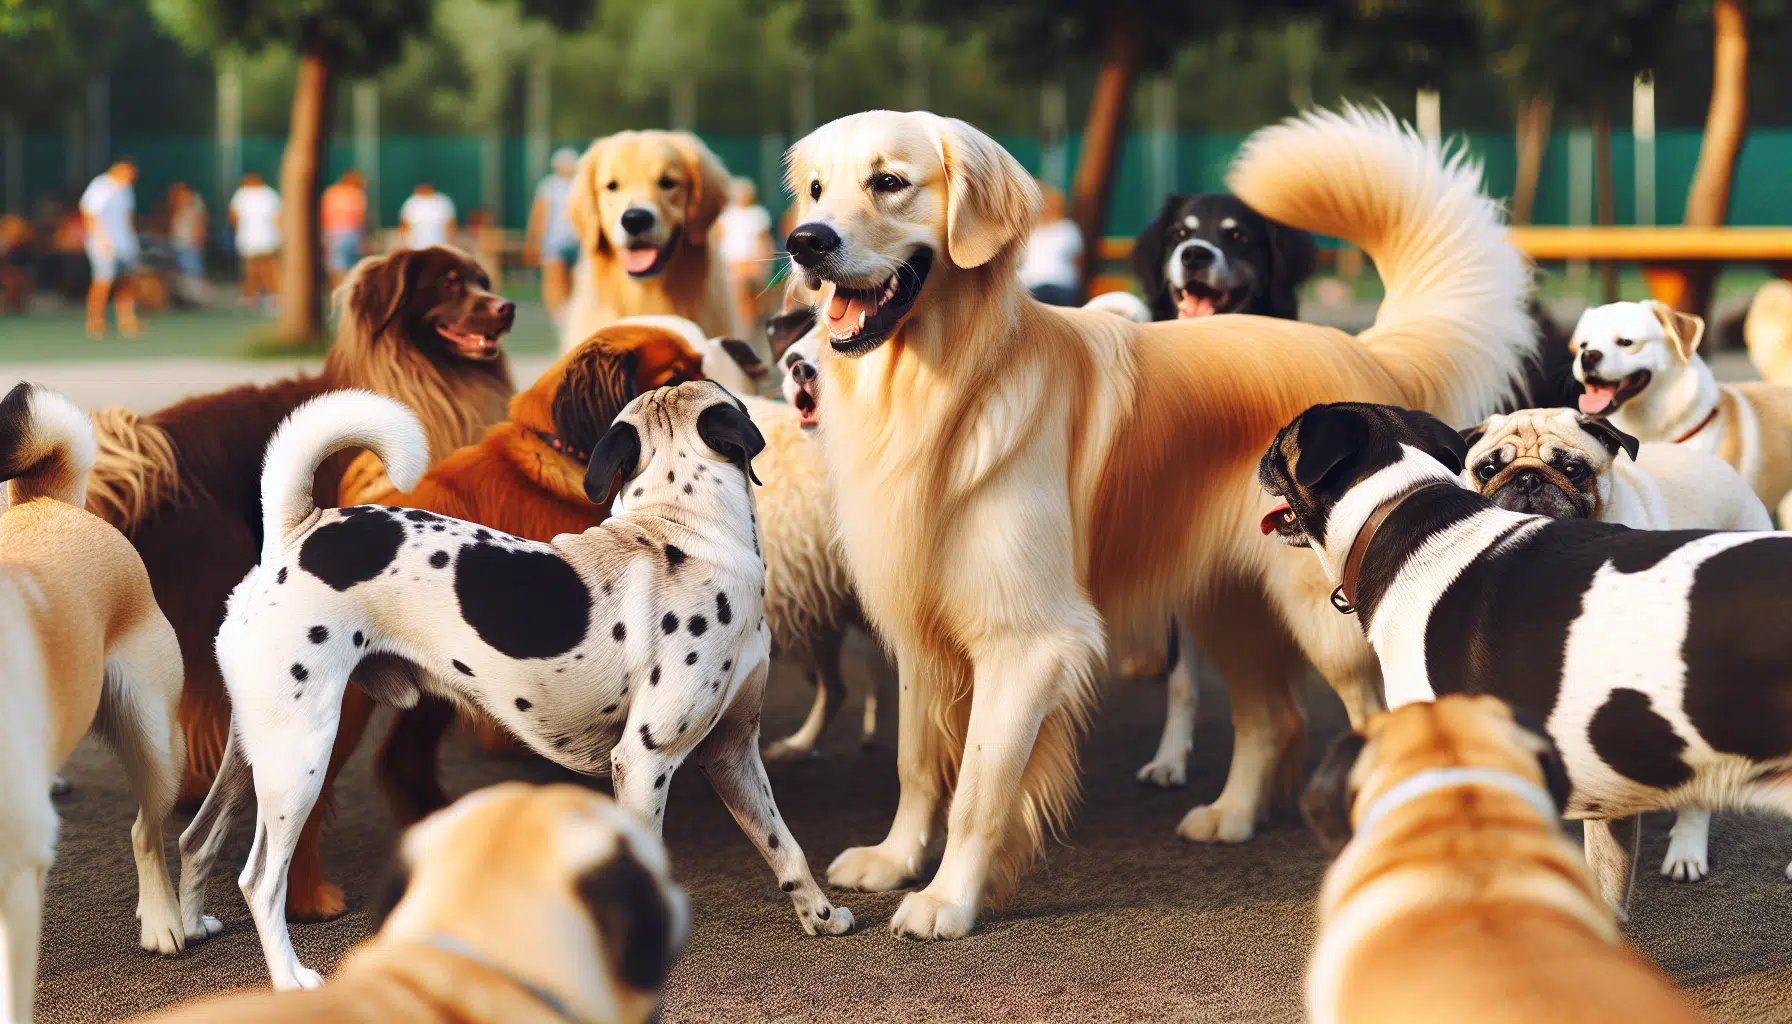 An adult dog interacting with other dogs at a dog park